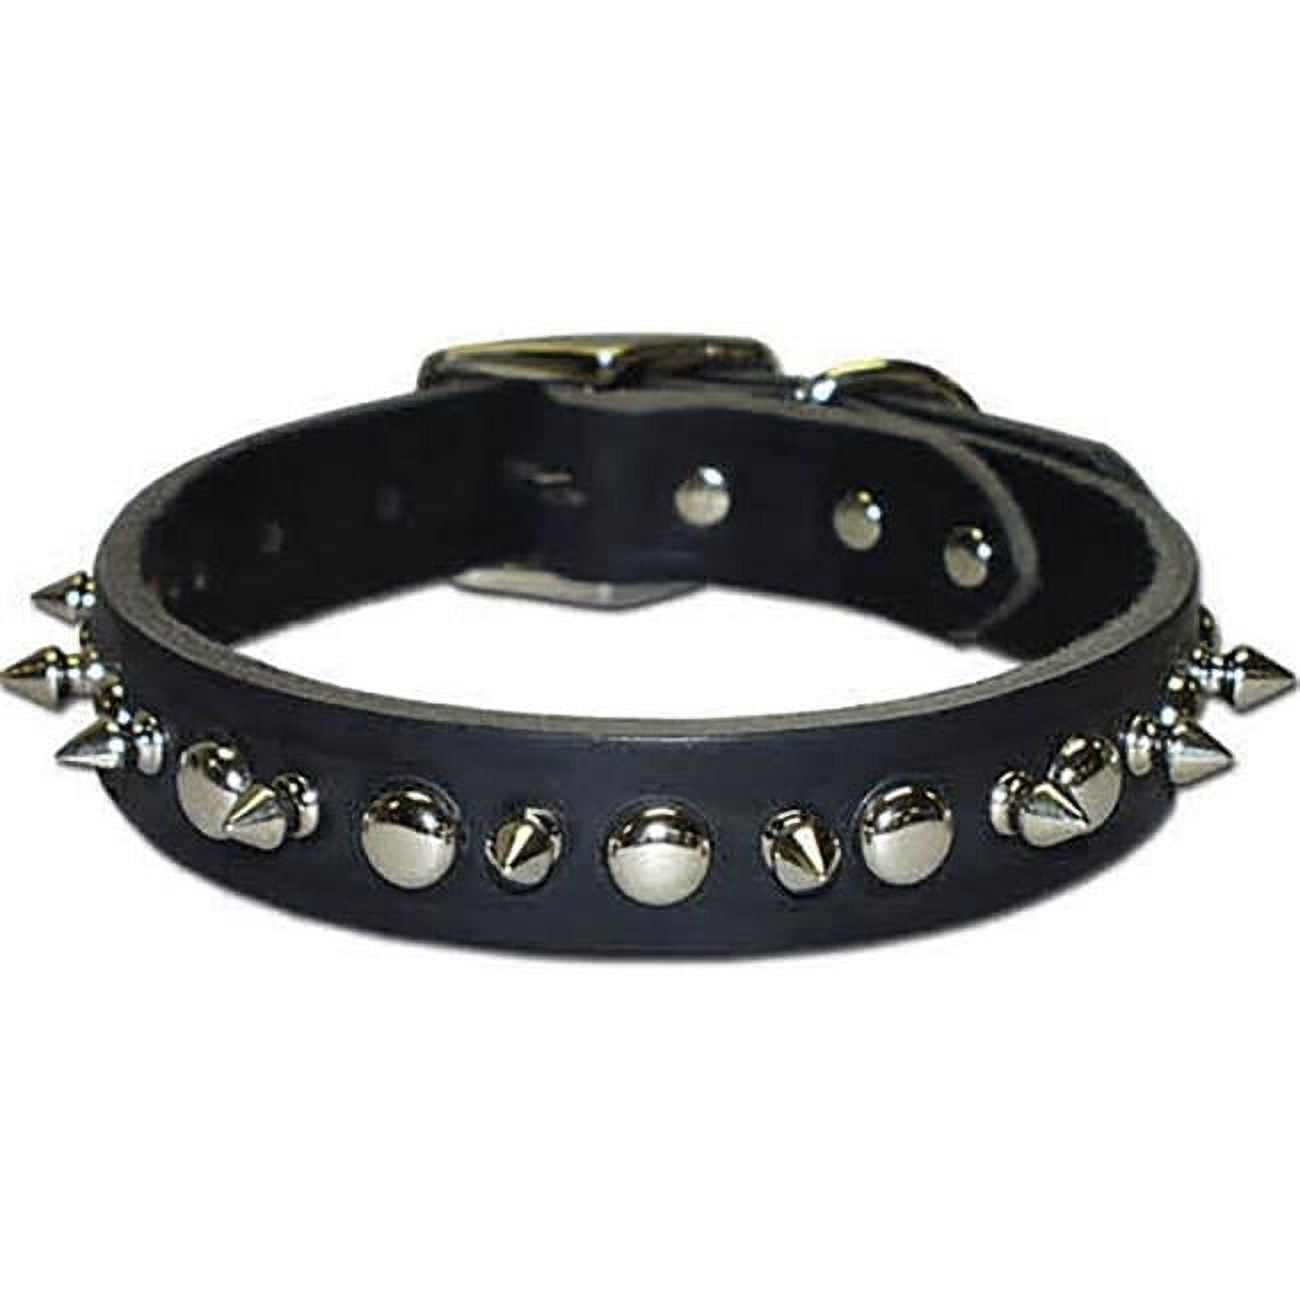 Picture of Leather Brothers 100LKS-BK20 1 x 20 in. Latigo Leather 1 Ply Spiked Dog Collar, Black